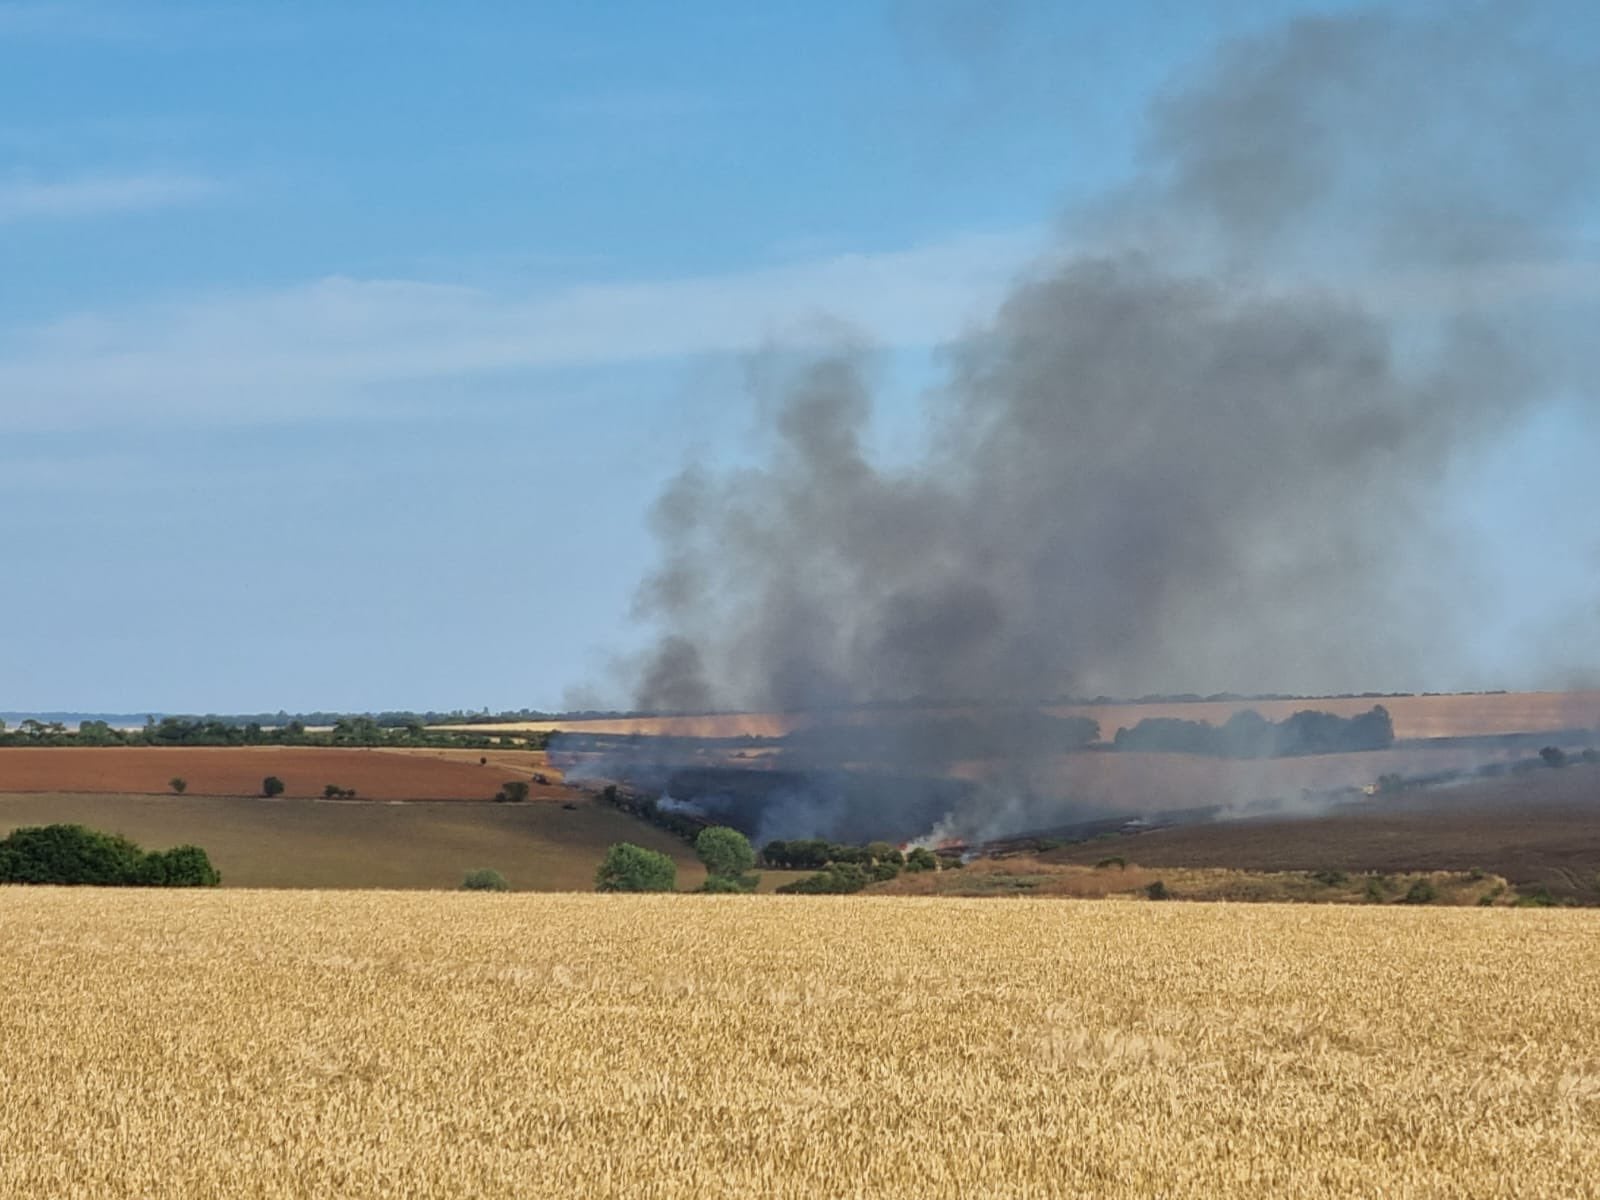 Dorset and Wiltshire Fire and Rescue Service attended a field fire in Winterbourne Stoke earlier this week